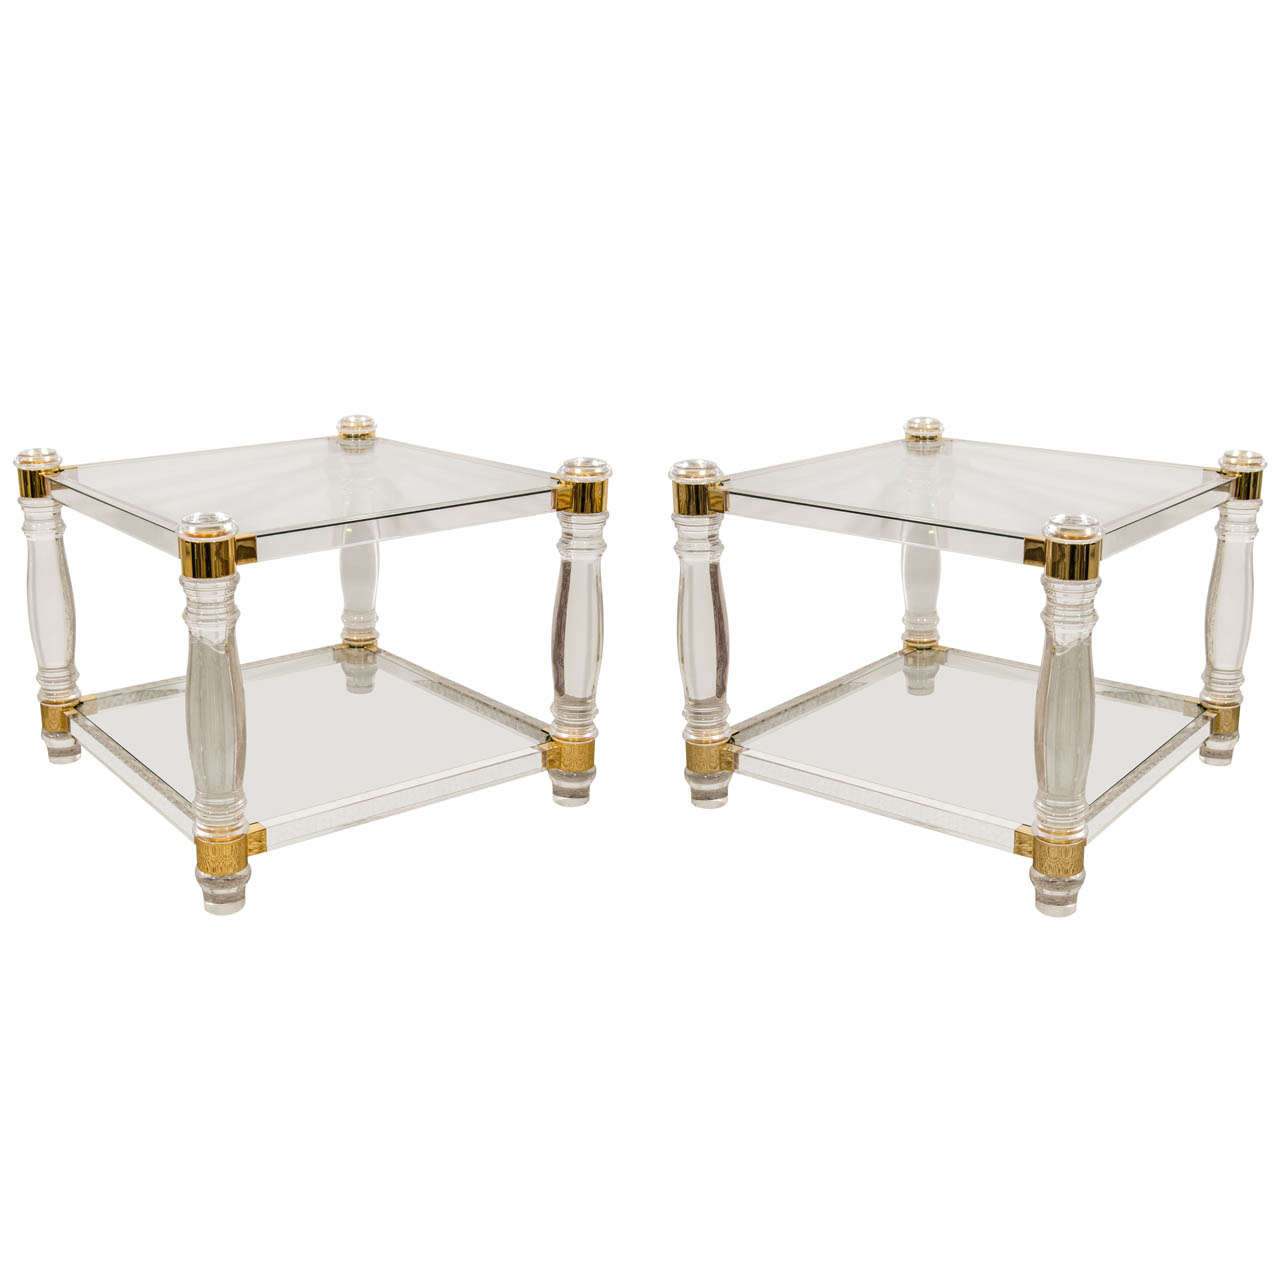 A Pair of Glass and Lucite Side Tables